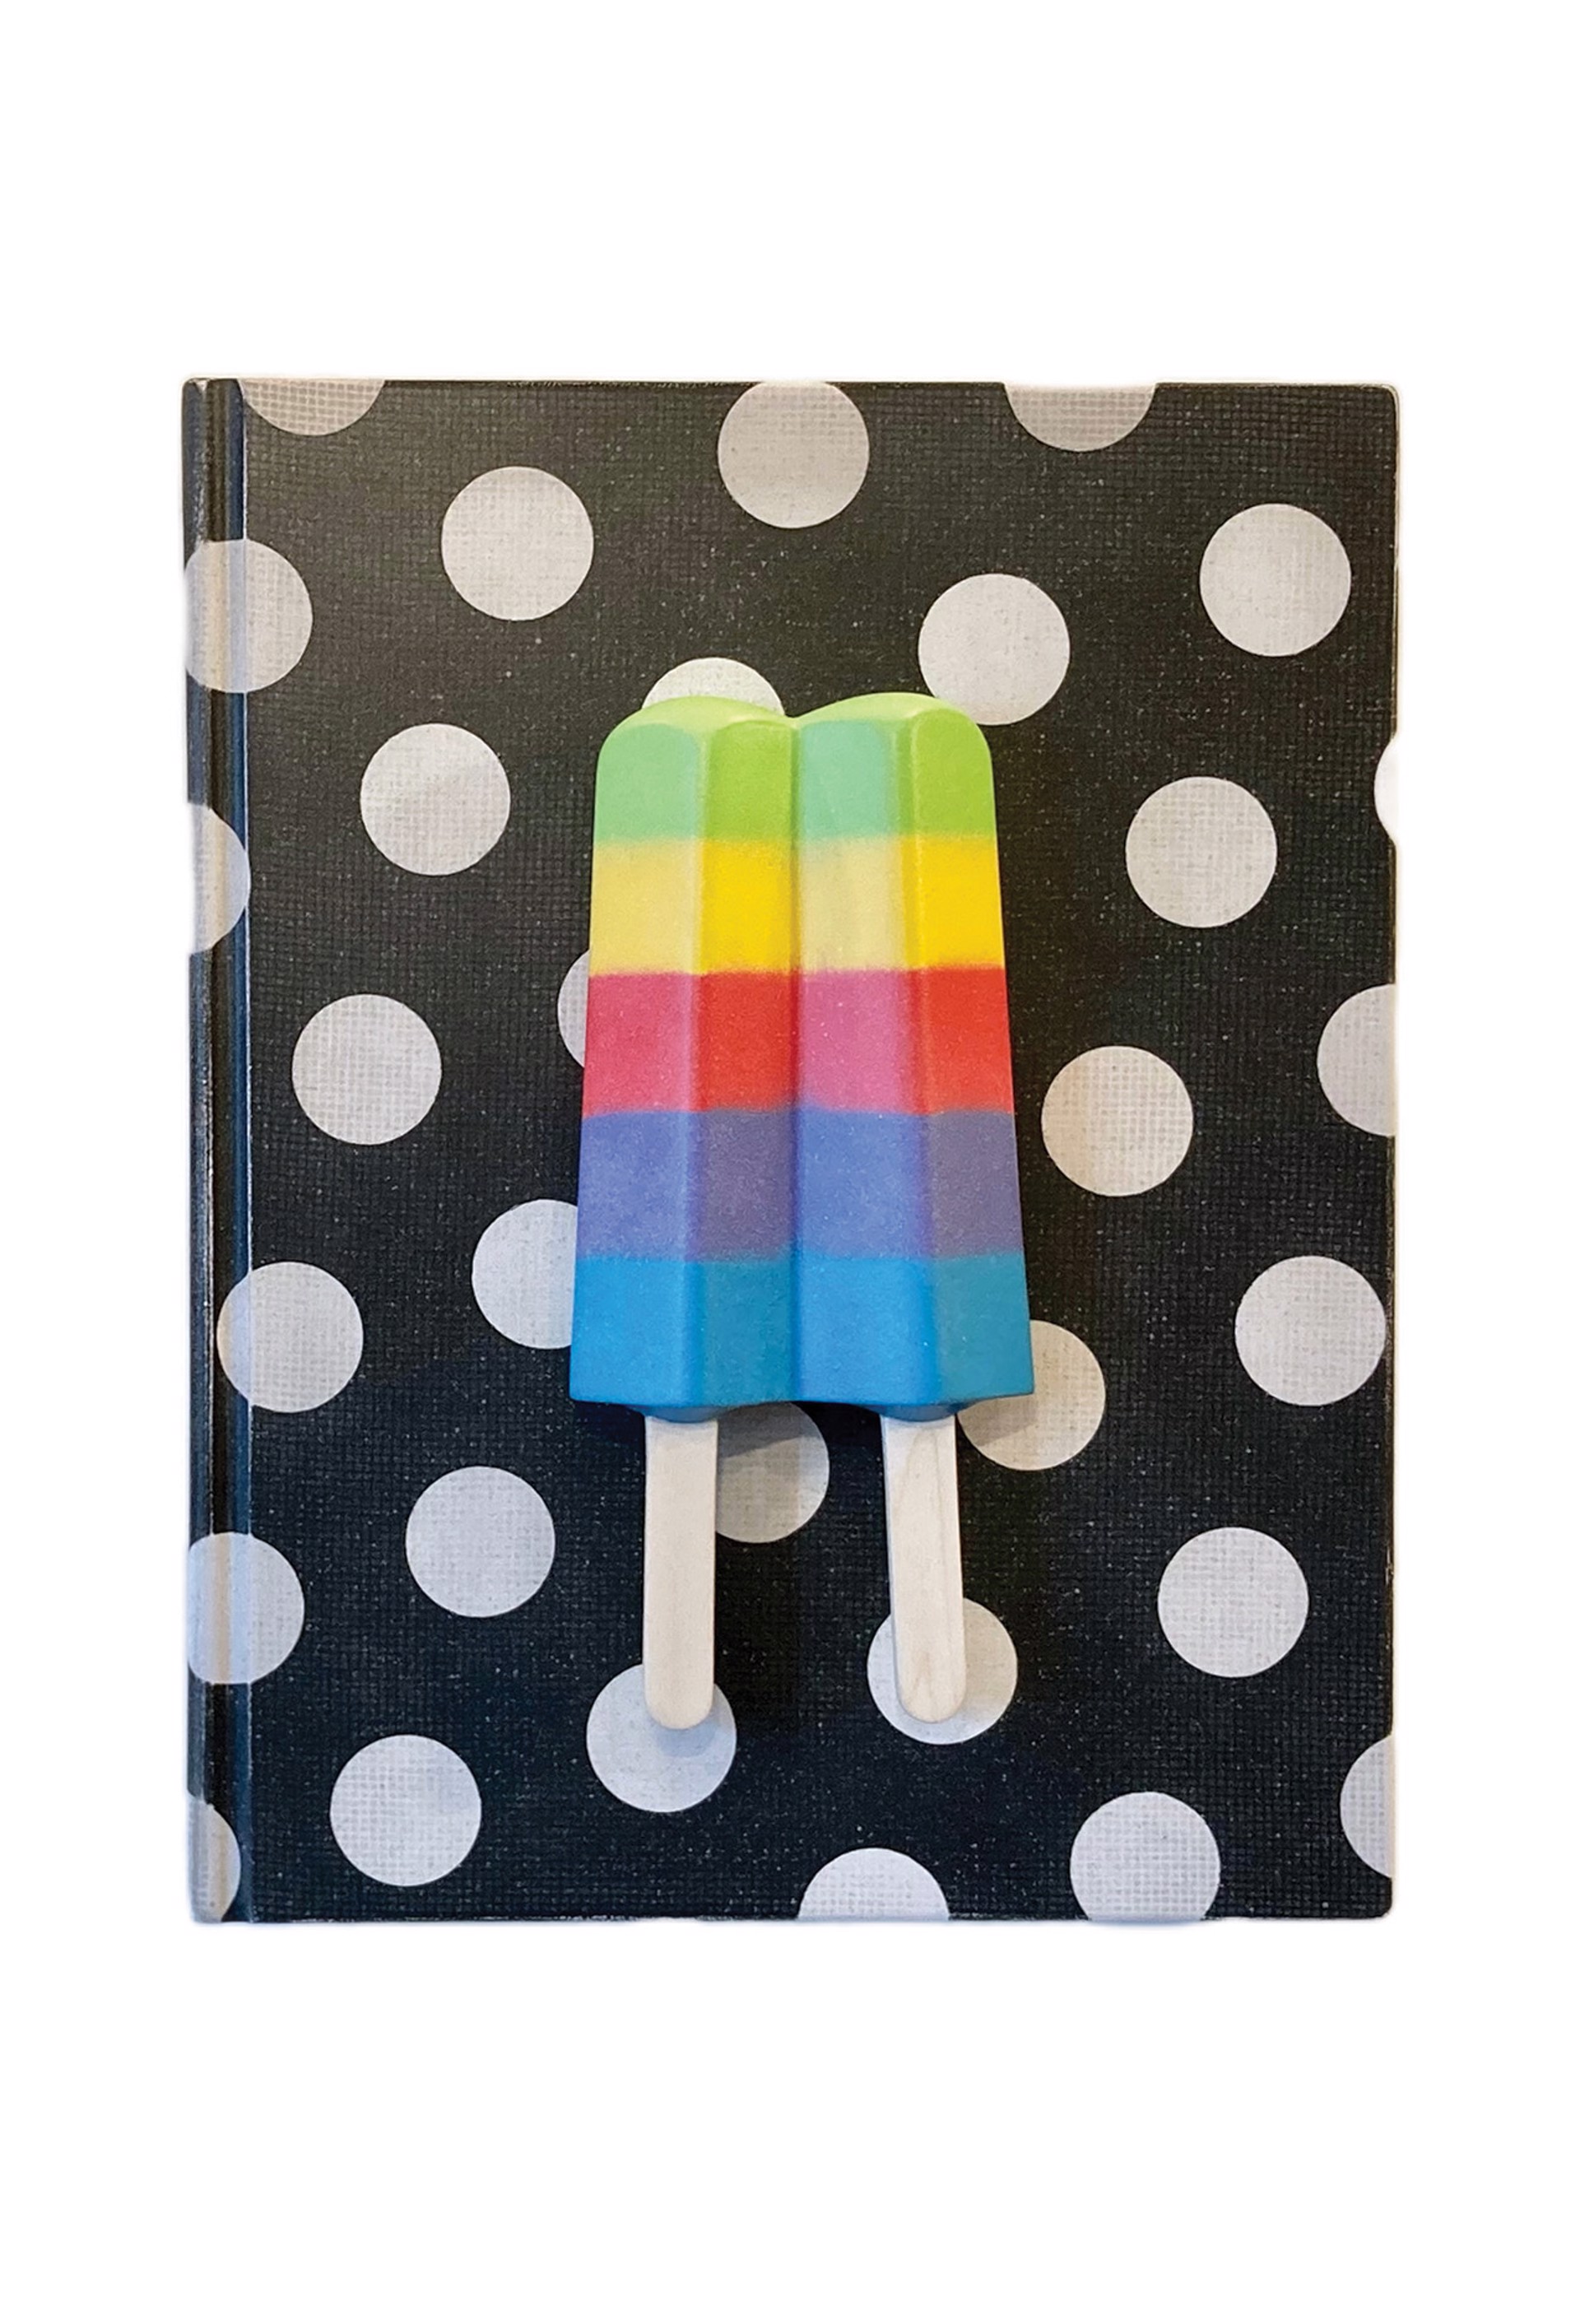 Popsicle by Sean O'Meallie